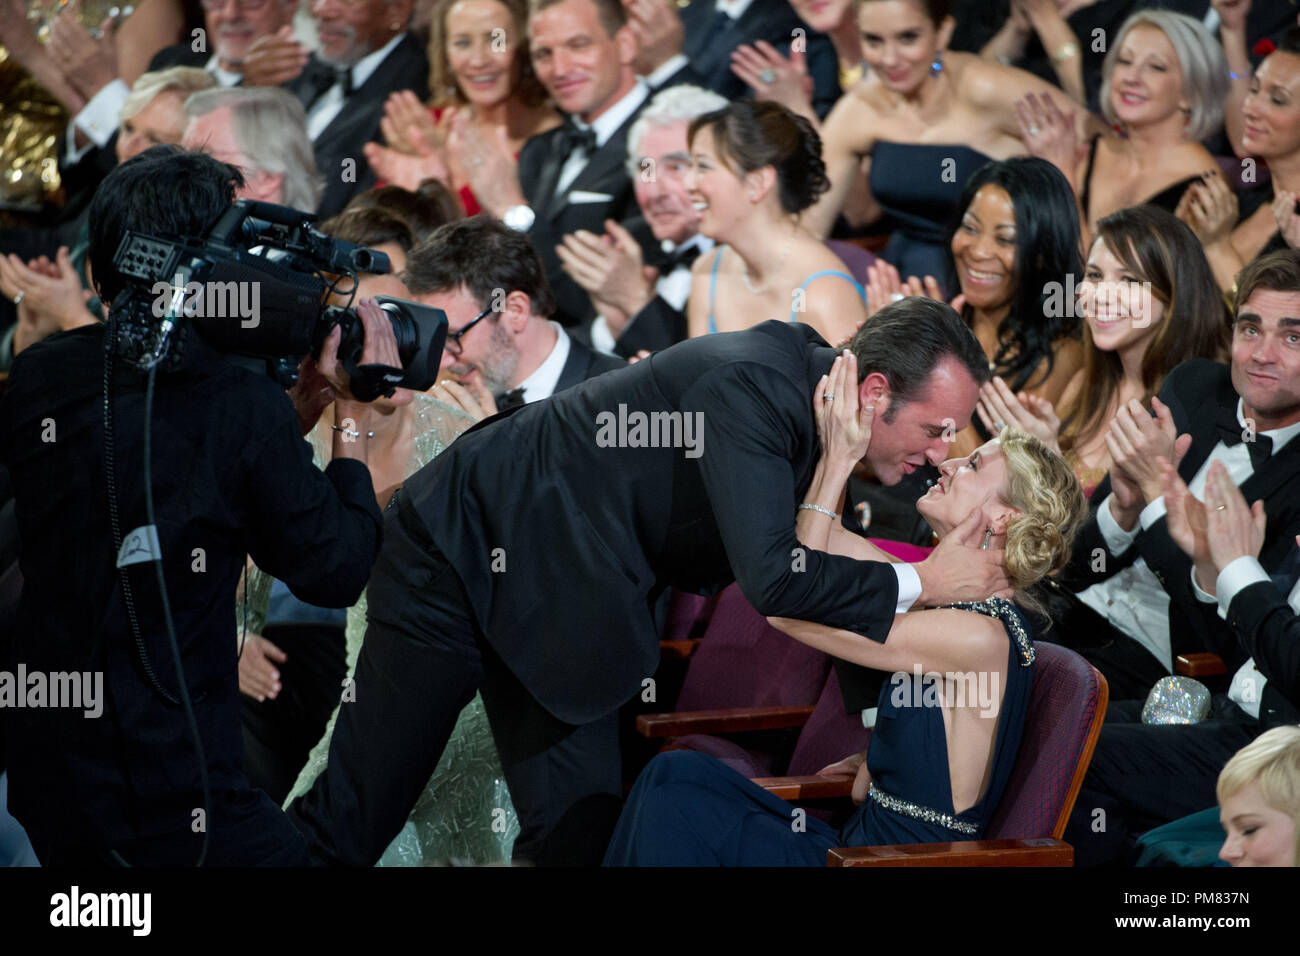 Jean Dujardin wins the Oscar for Performance by an Actor in a Leading Role for his role in 'The Artist' during the live ABC Television Network broadcast of the 84th Annual Academy Awards from the Hollywood and Highland Center, in Hollywood, CA, Sunday, February 26, 2012. Stock Photo